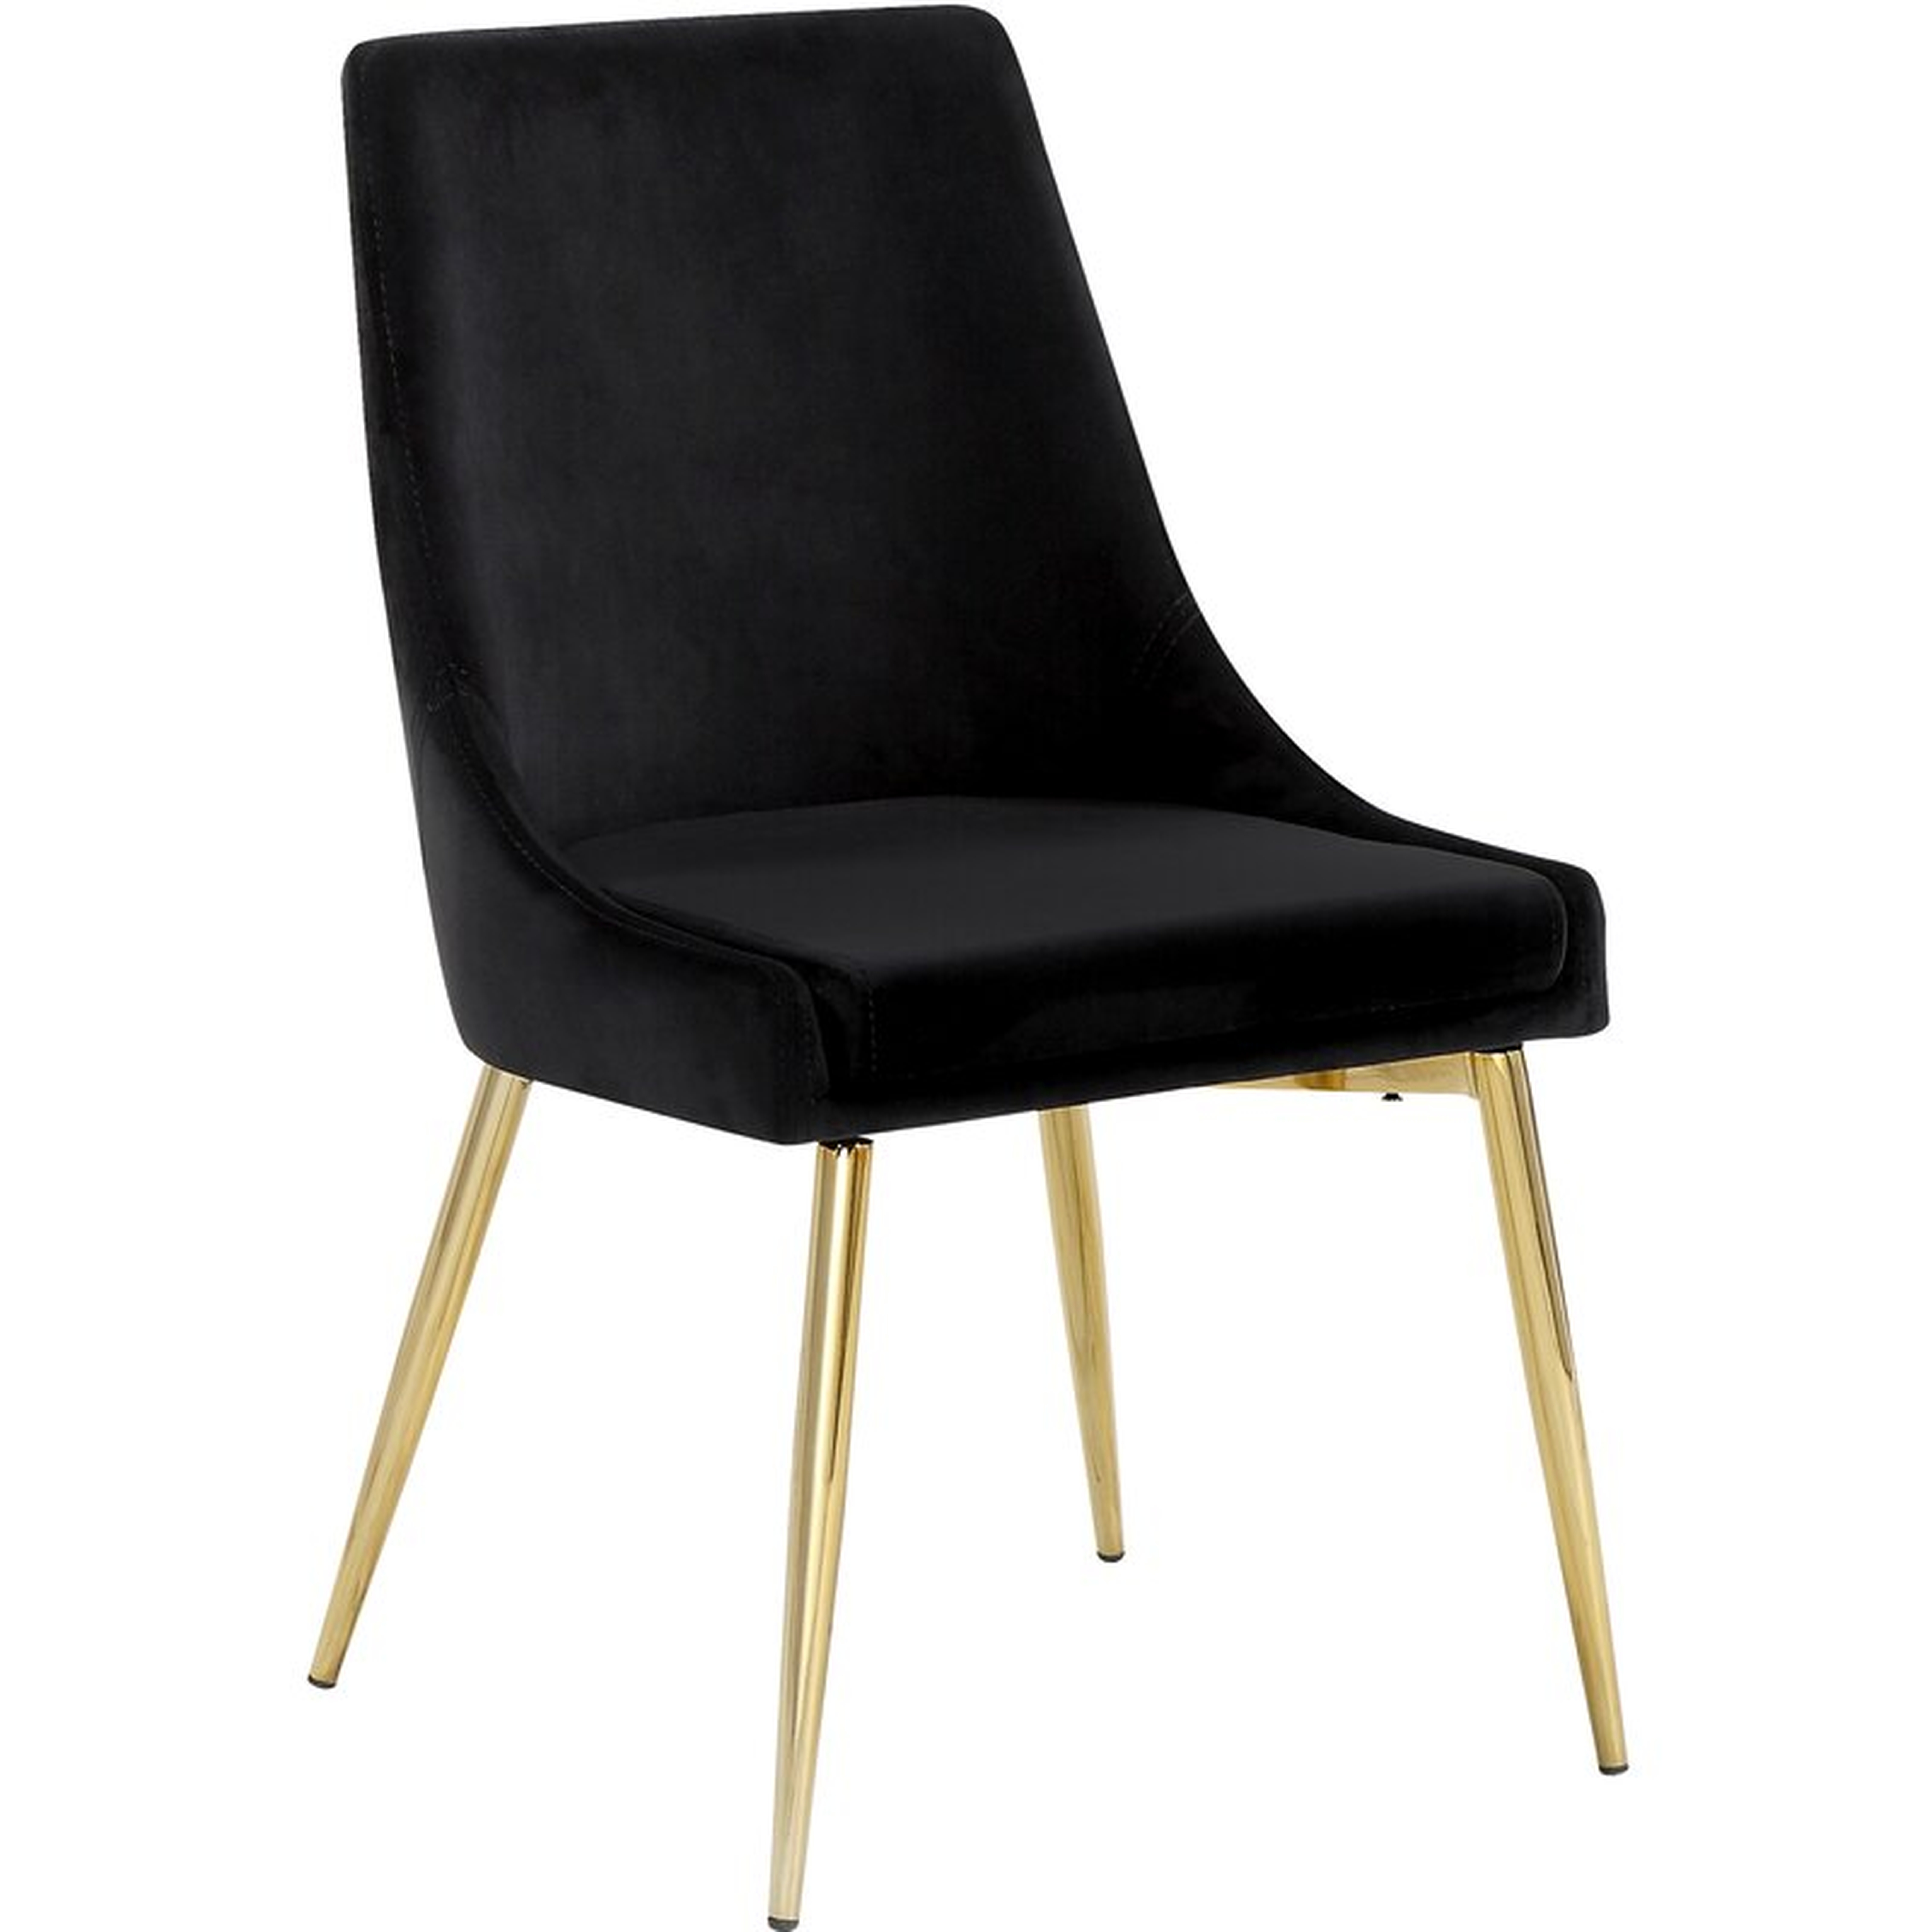 Paluch Upholstered Dining Chair (set of 2) - Black, Gold - Wayfair